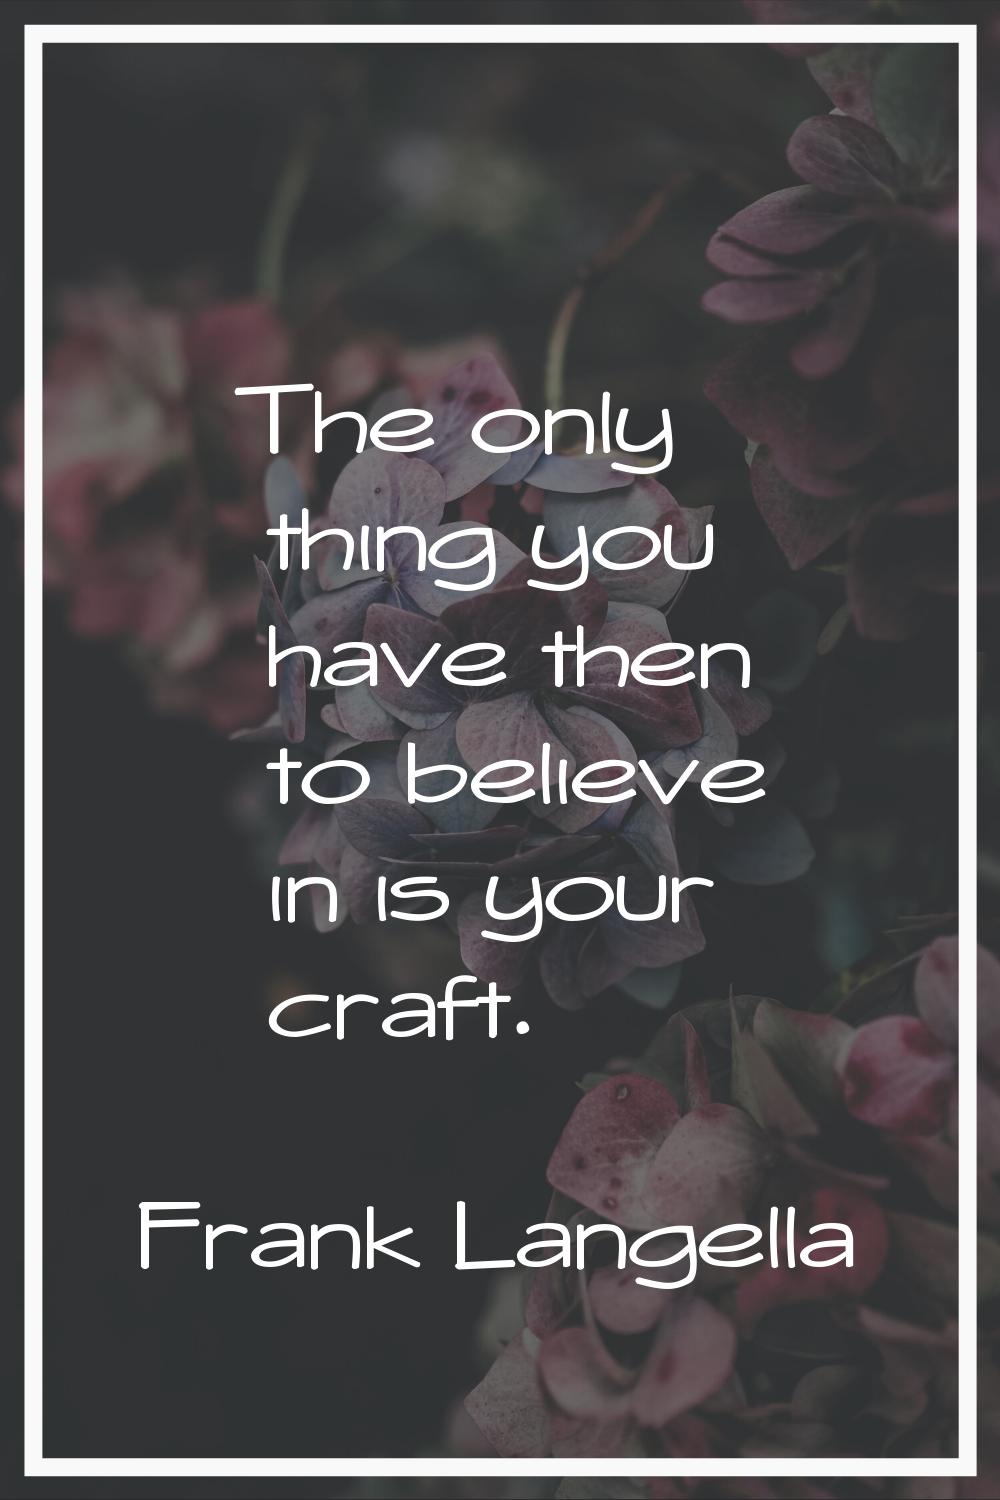 The only thing you have then to believe in is your craft.